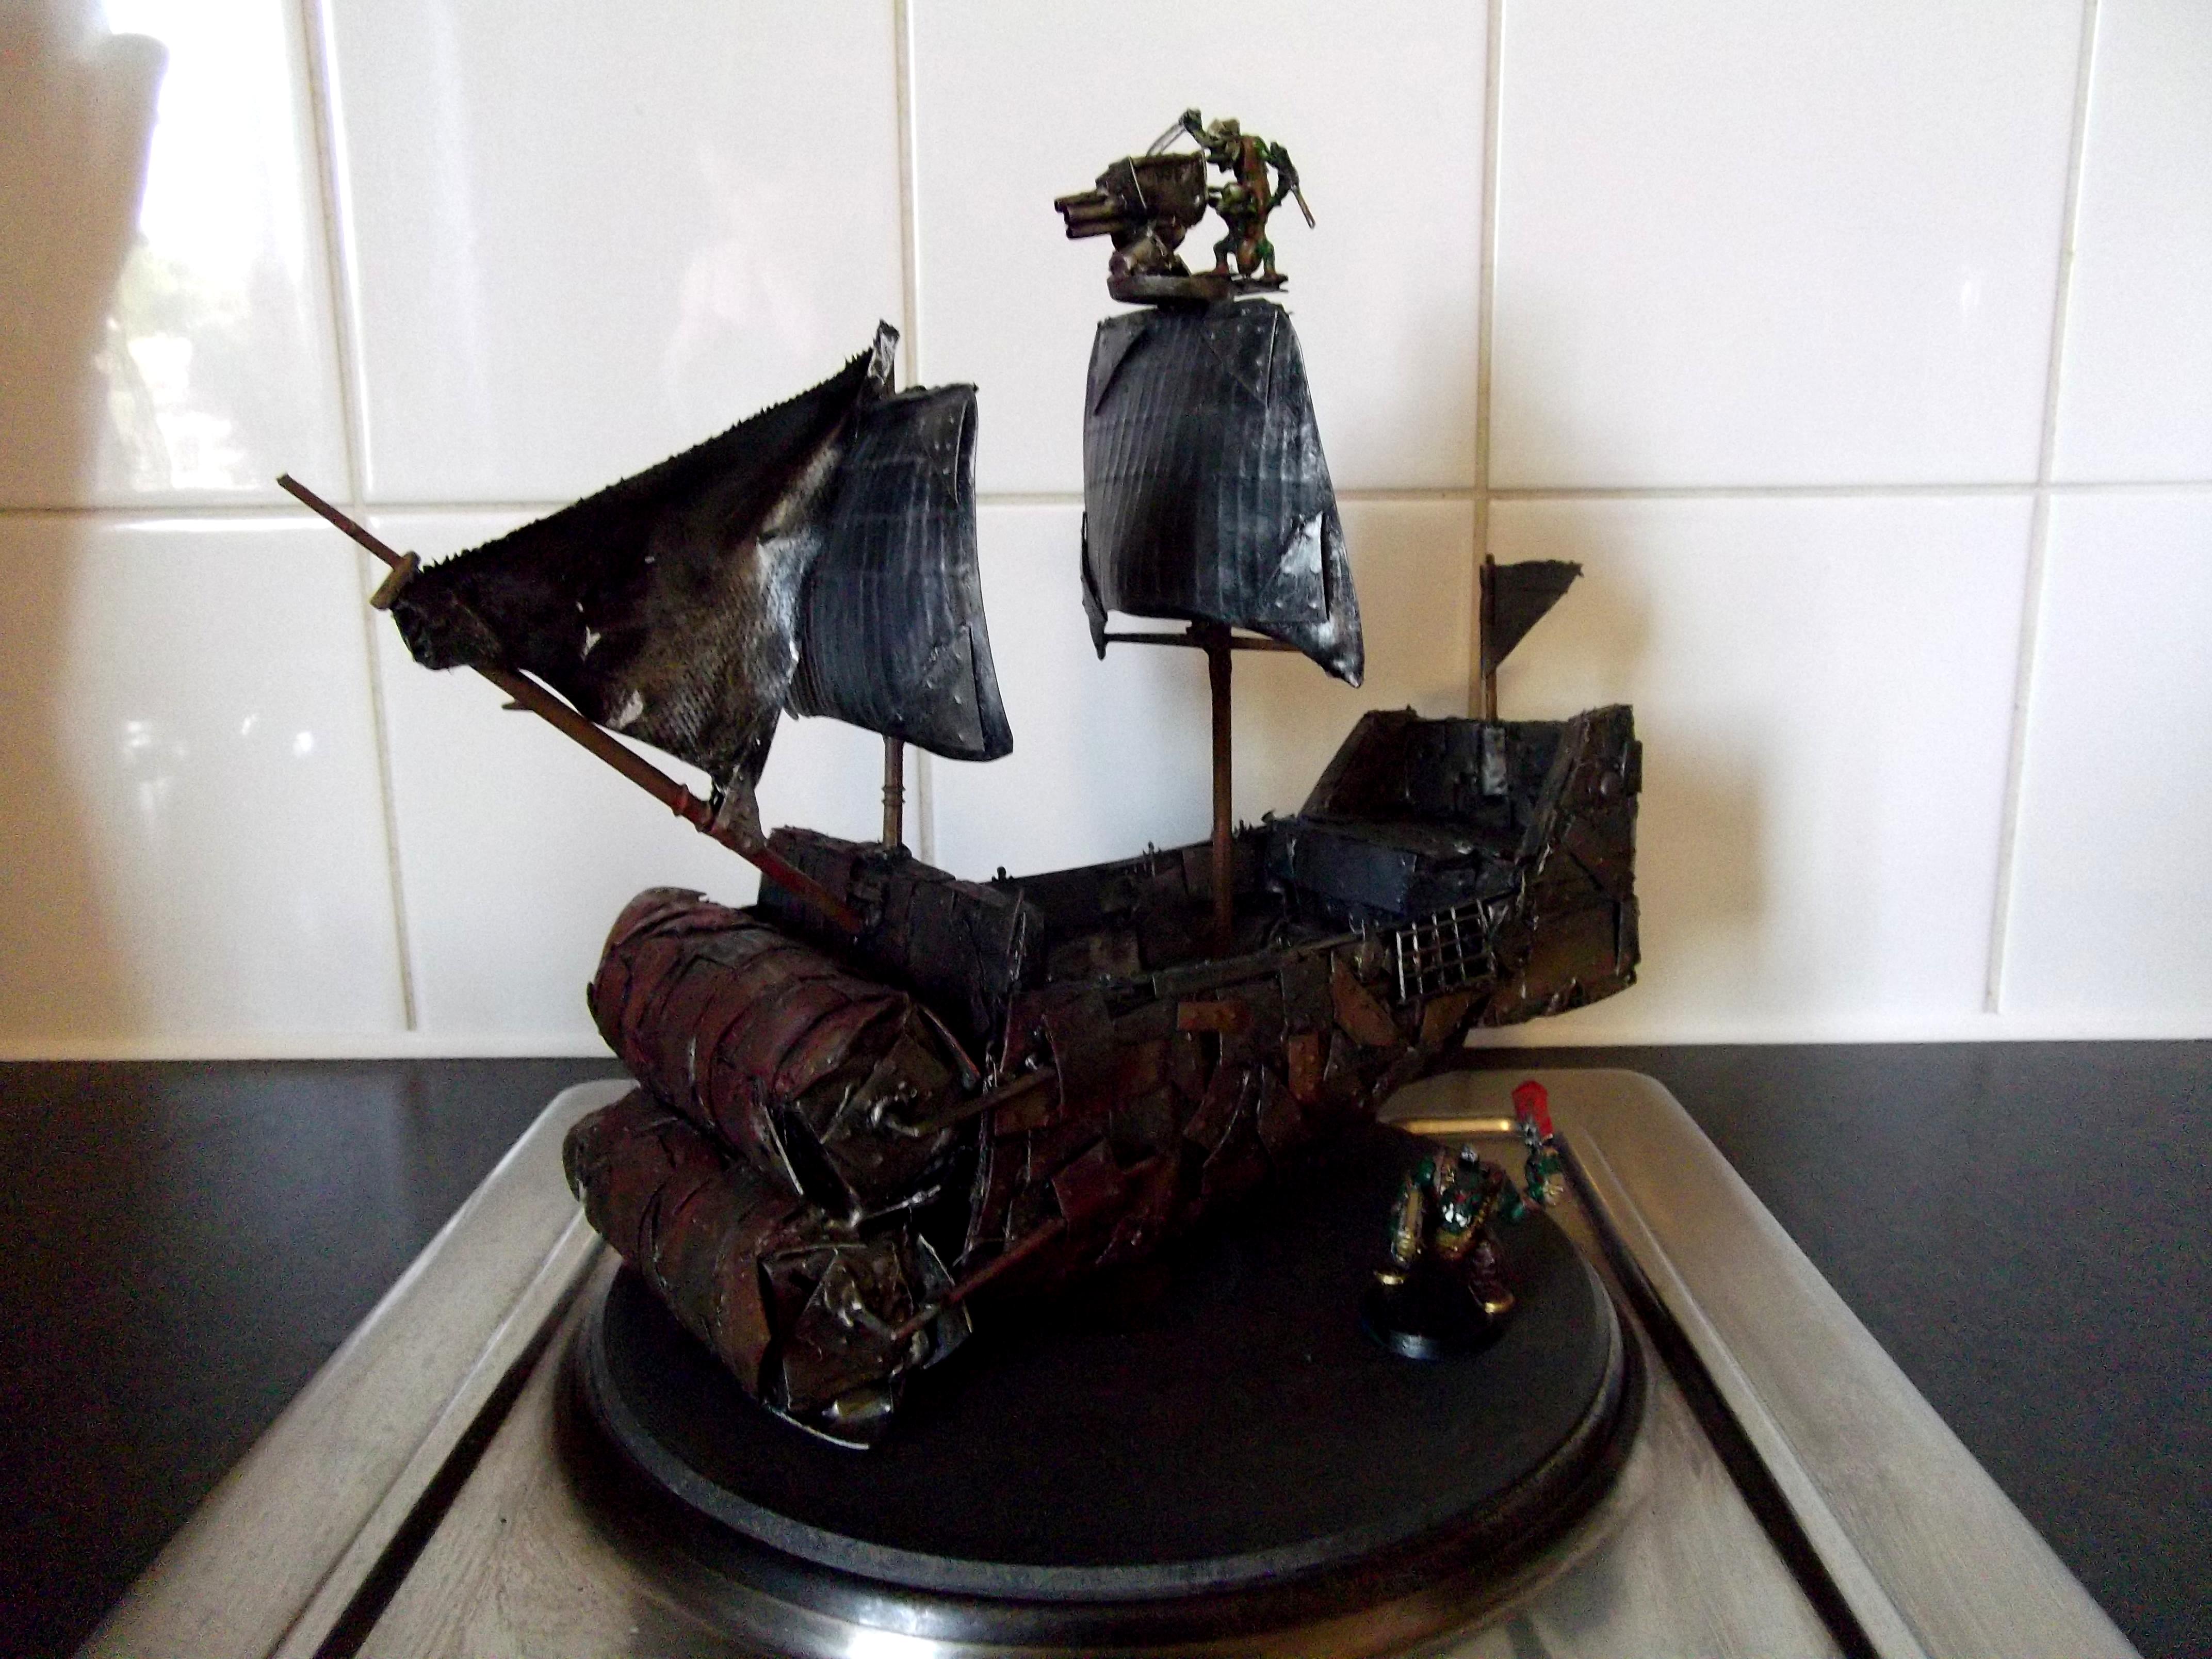 Battlewagon, Conversion, Deffrolla, Freebooter, Looted, Orks, Pirate, Scratch Build, Ship, Wagon